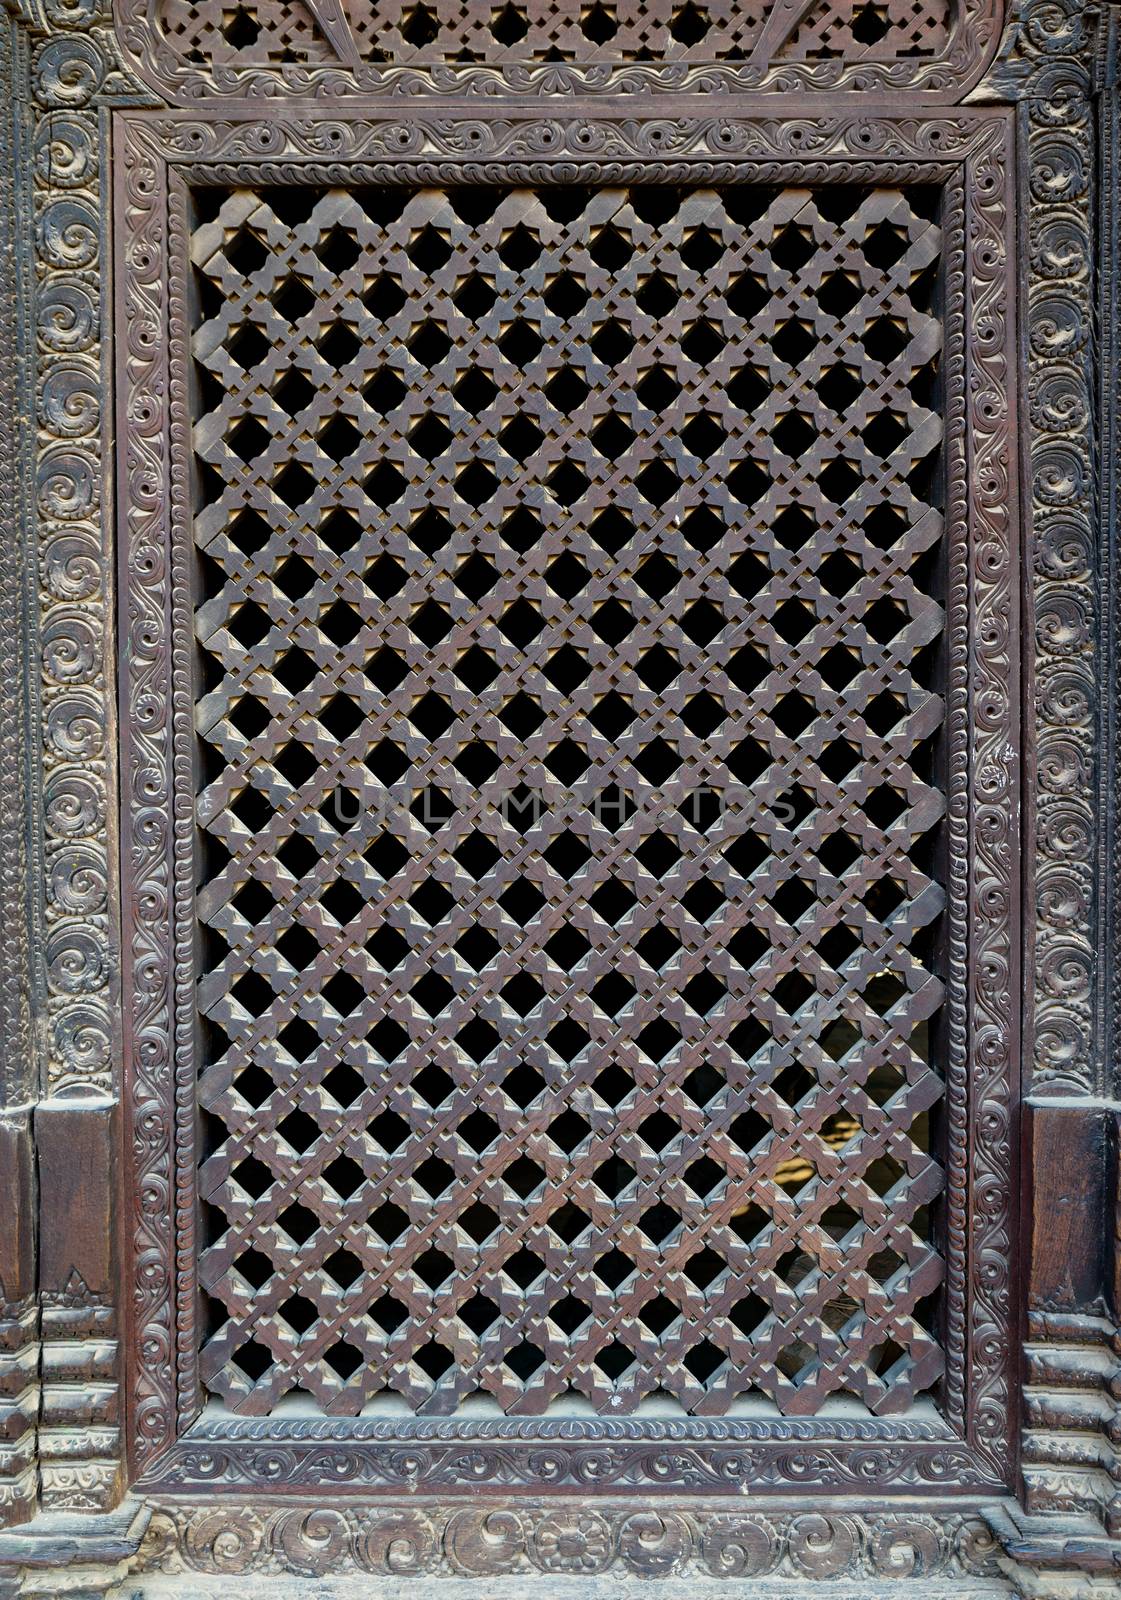 Nepalese window called Ankhi jhyal by dutourdumonde